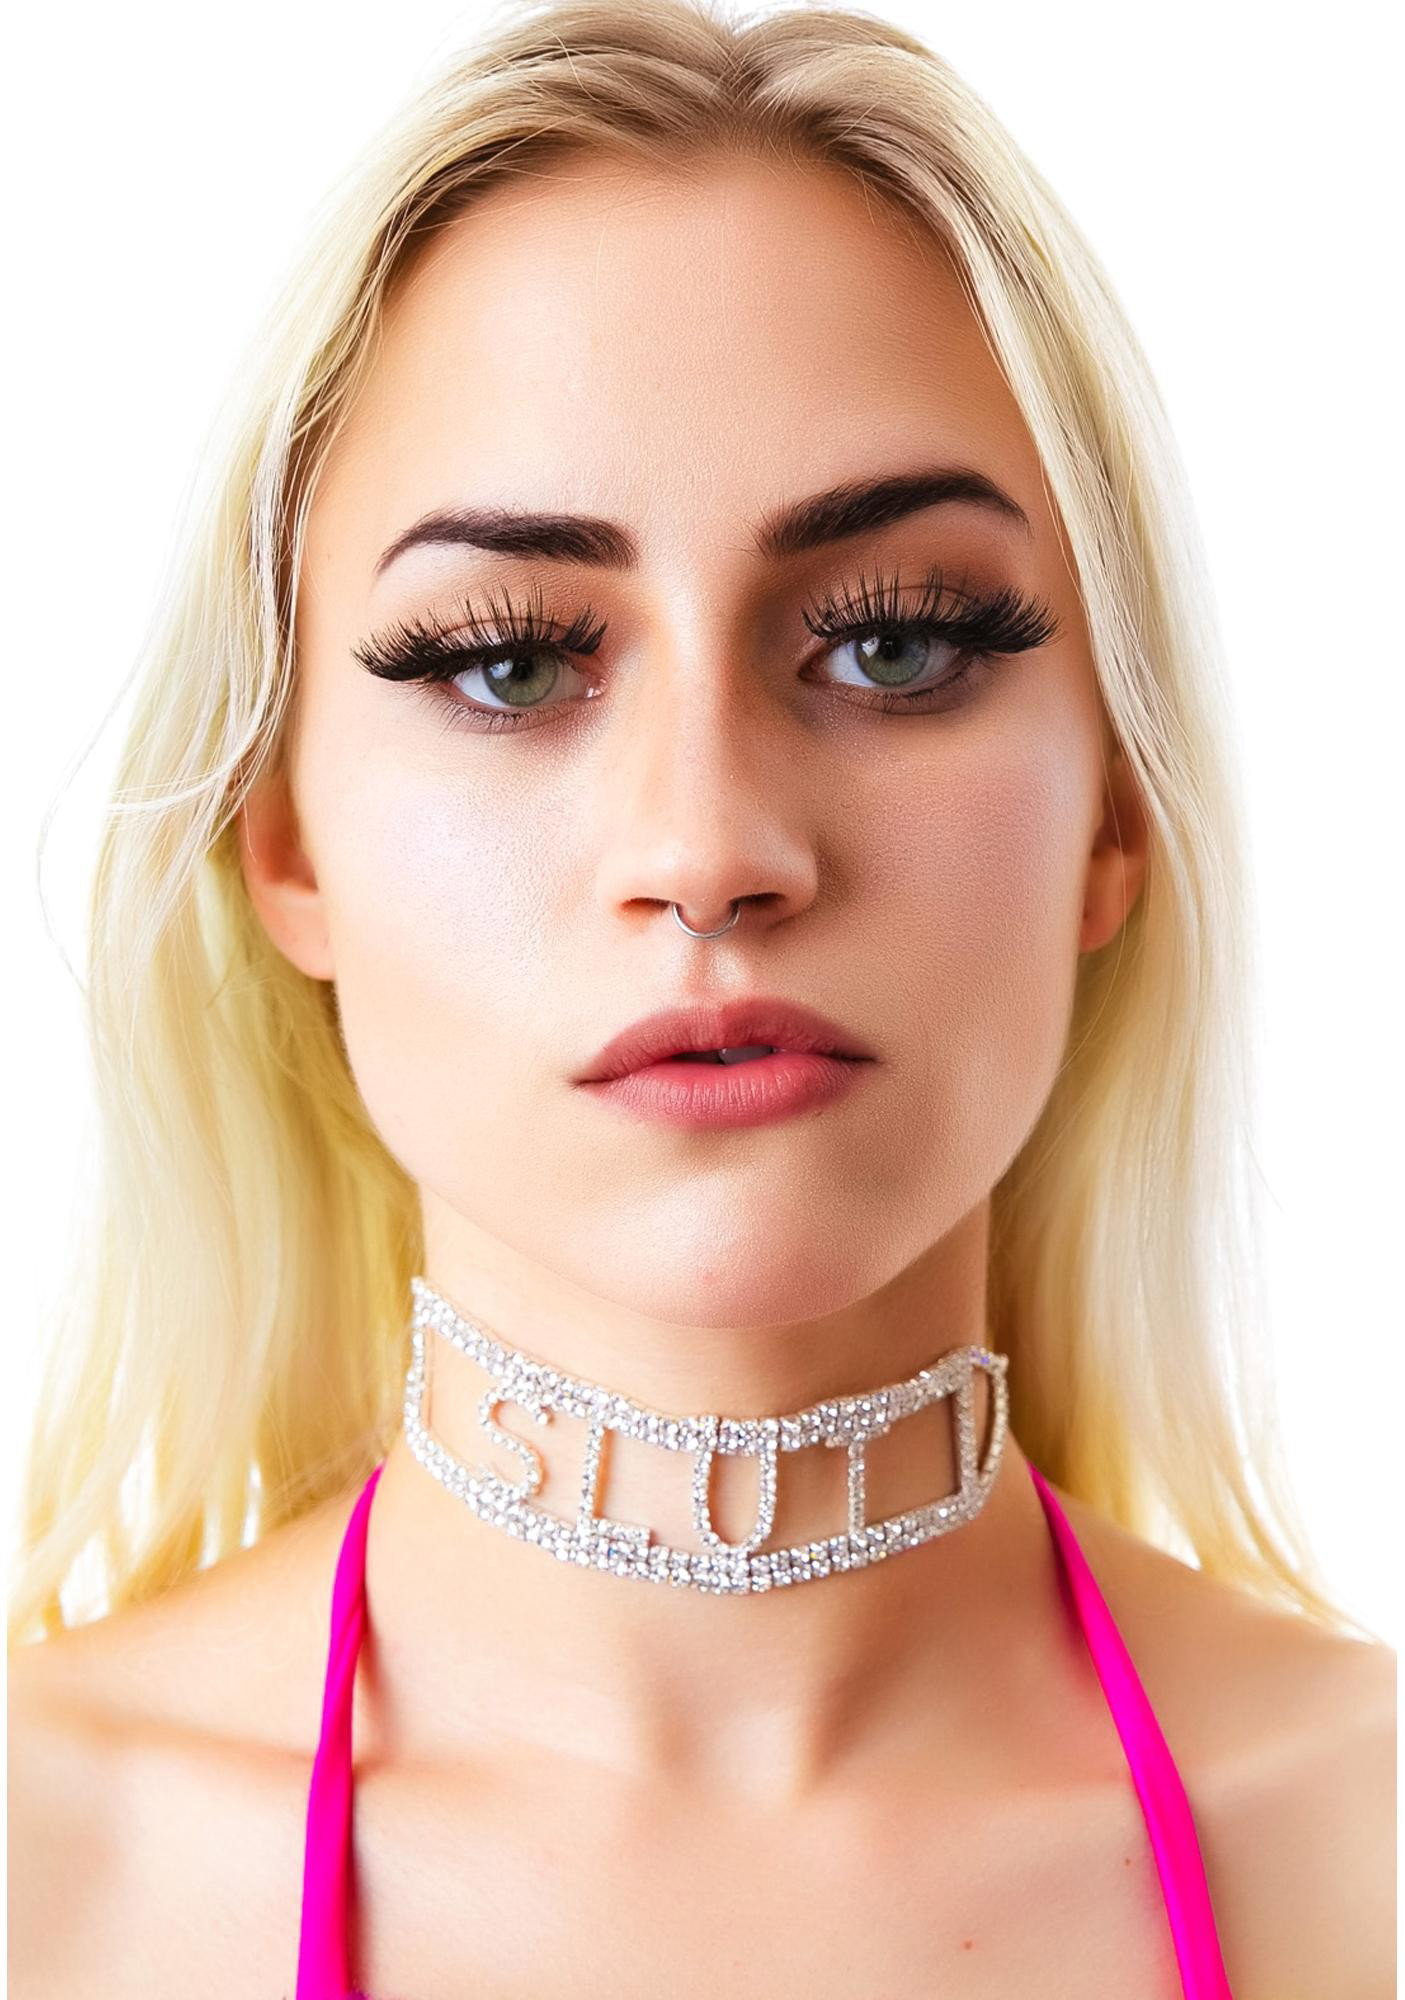 Watch the Photo by NaughtySluts with the username @NaughtySluts, posted on May 5, 2020. The post is about the topic TeenageSluts. and the text says '#teen #slut #young #naughty #daddy #choker #girl #hot #piercing #nose #diamond #necklace'